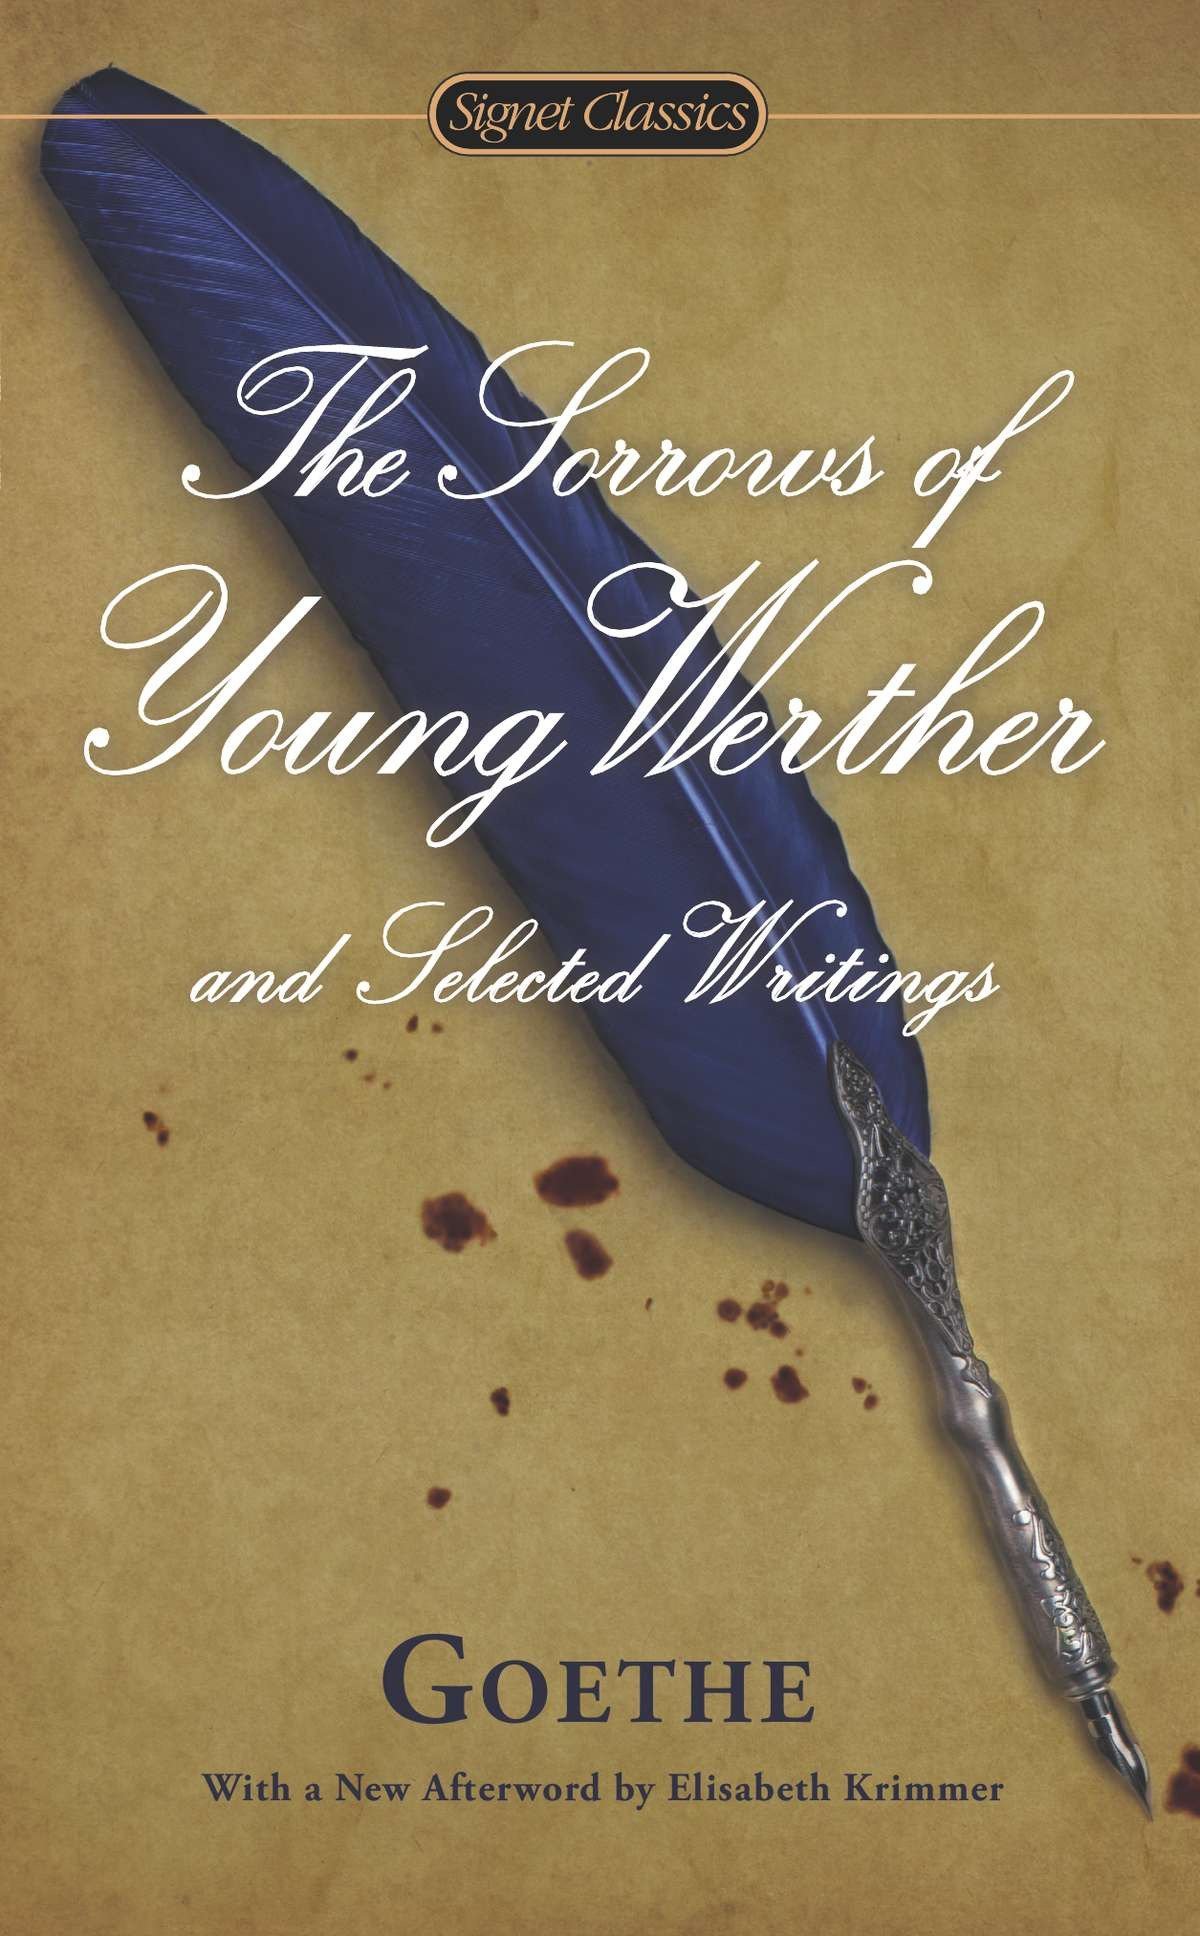 The Sorrows of Young Werther (2005, Modern Library)